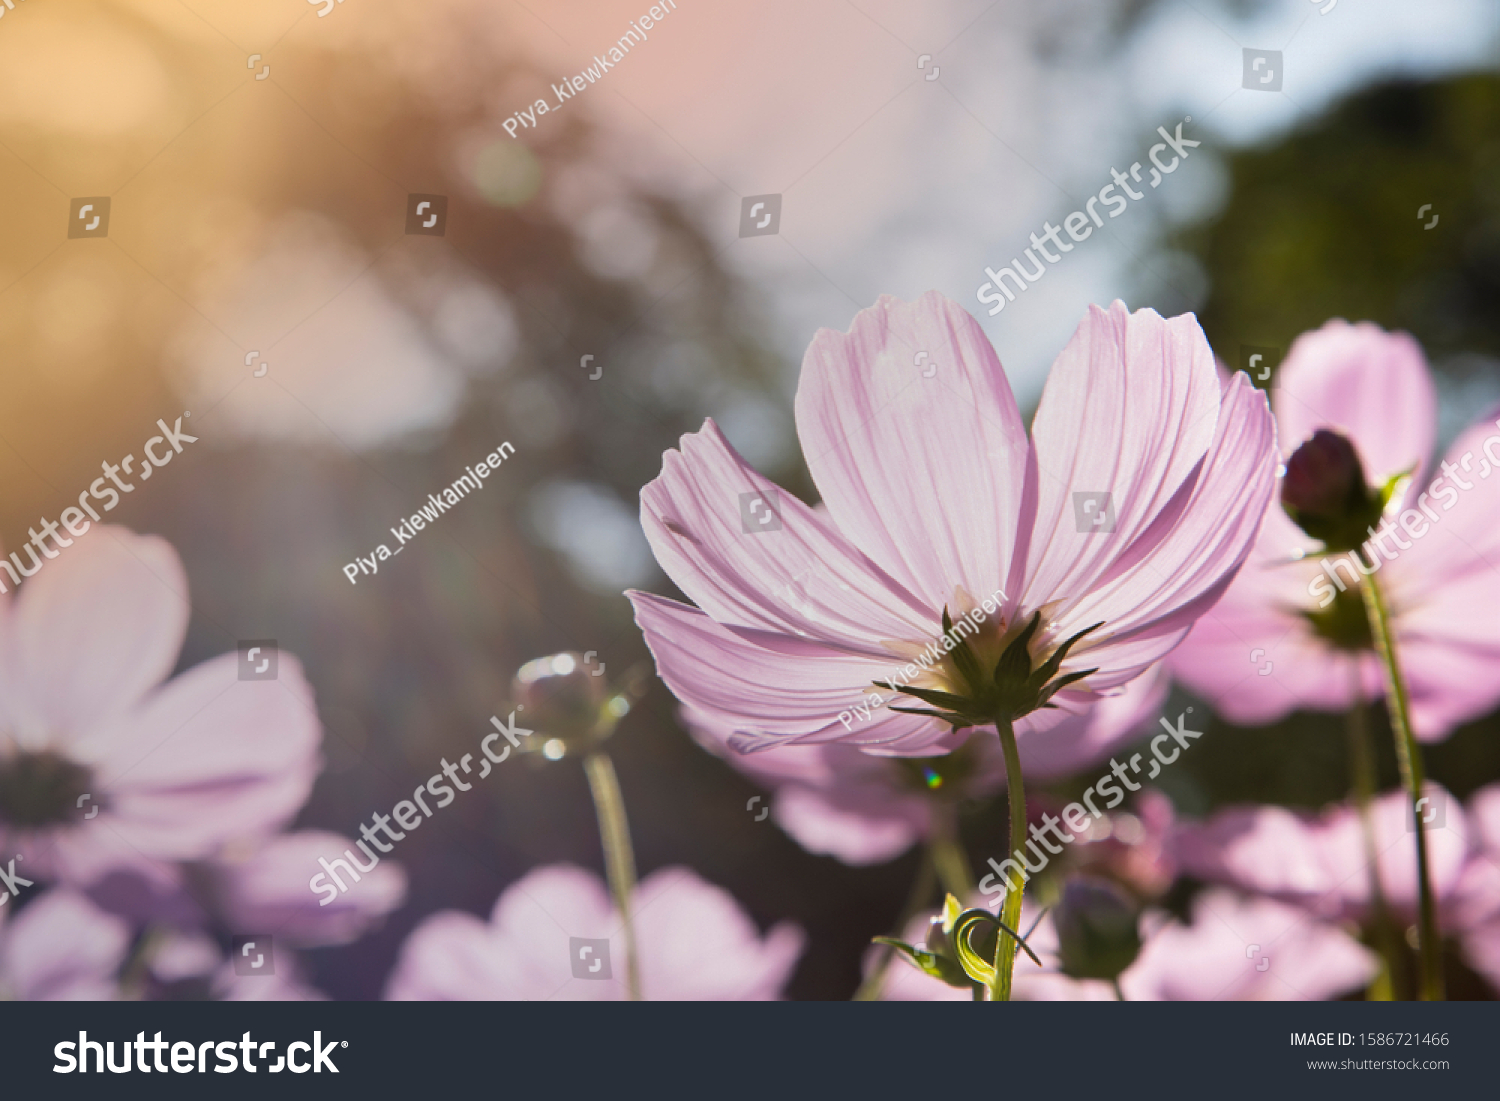 Beautiful Pink and White Cosmos flowers  under sunlight in garden.  sunlight morning. #1586721466